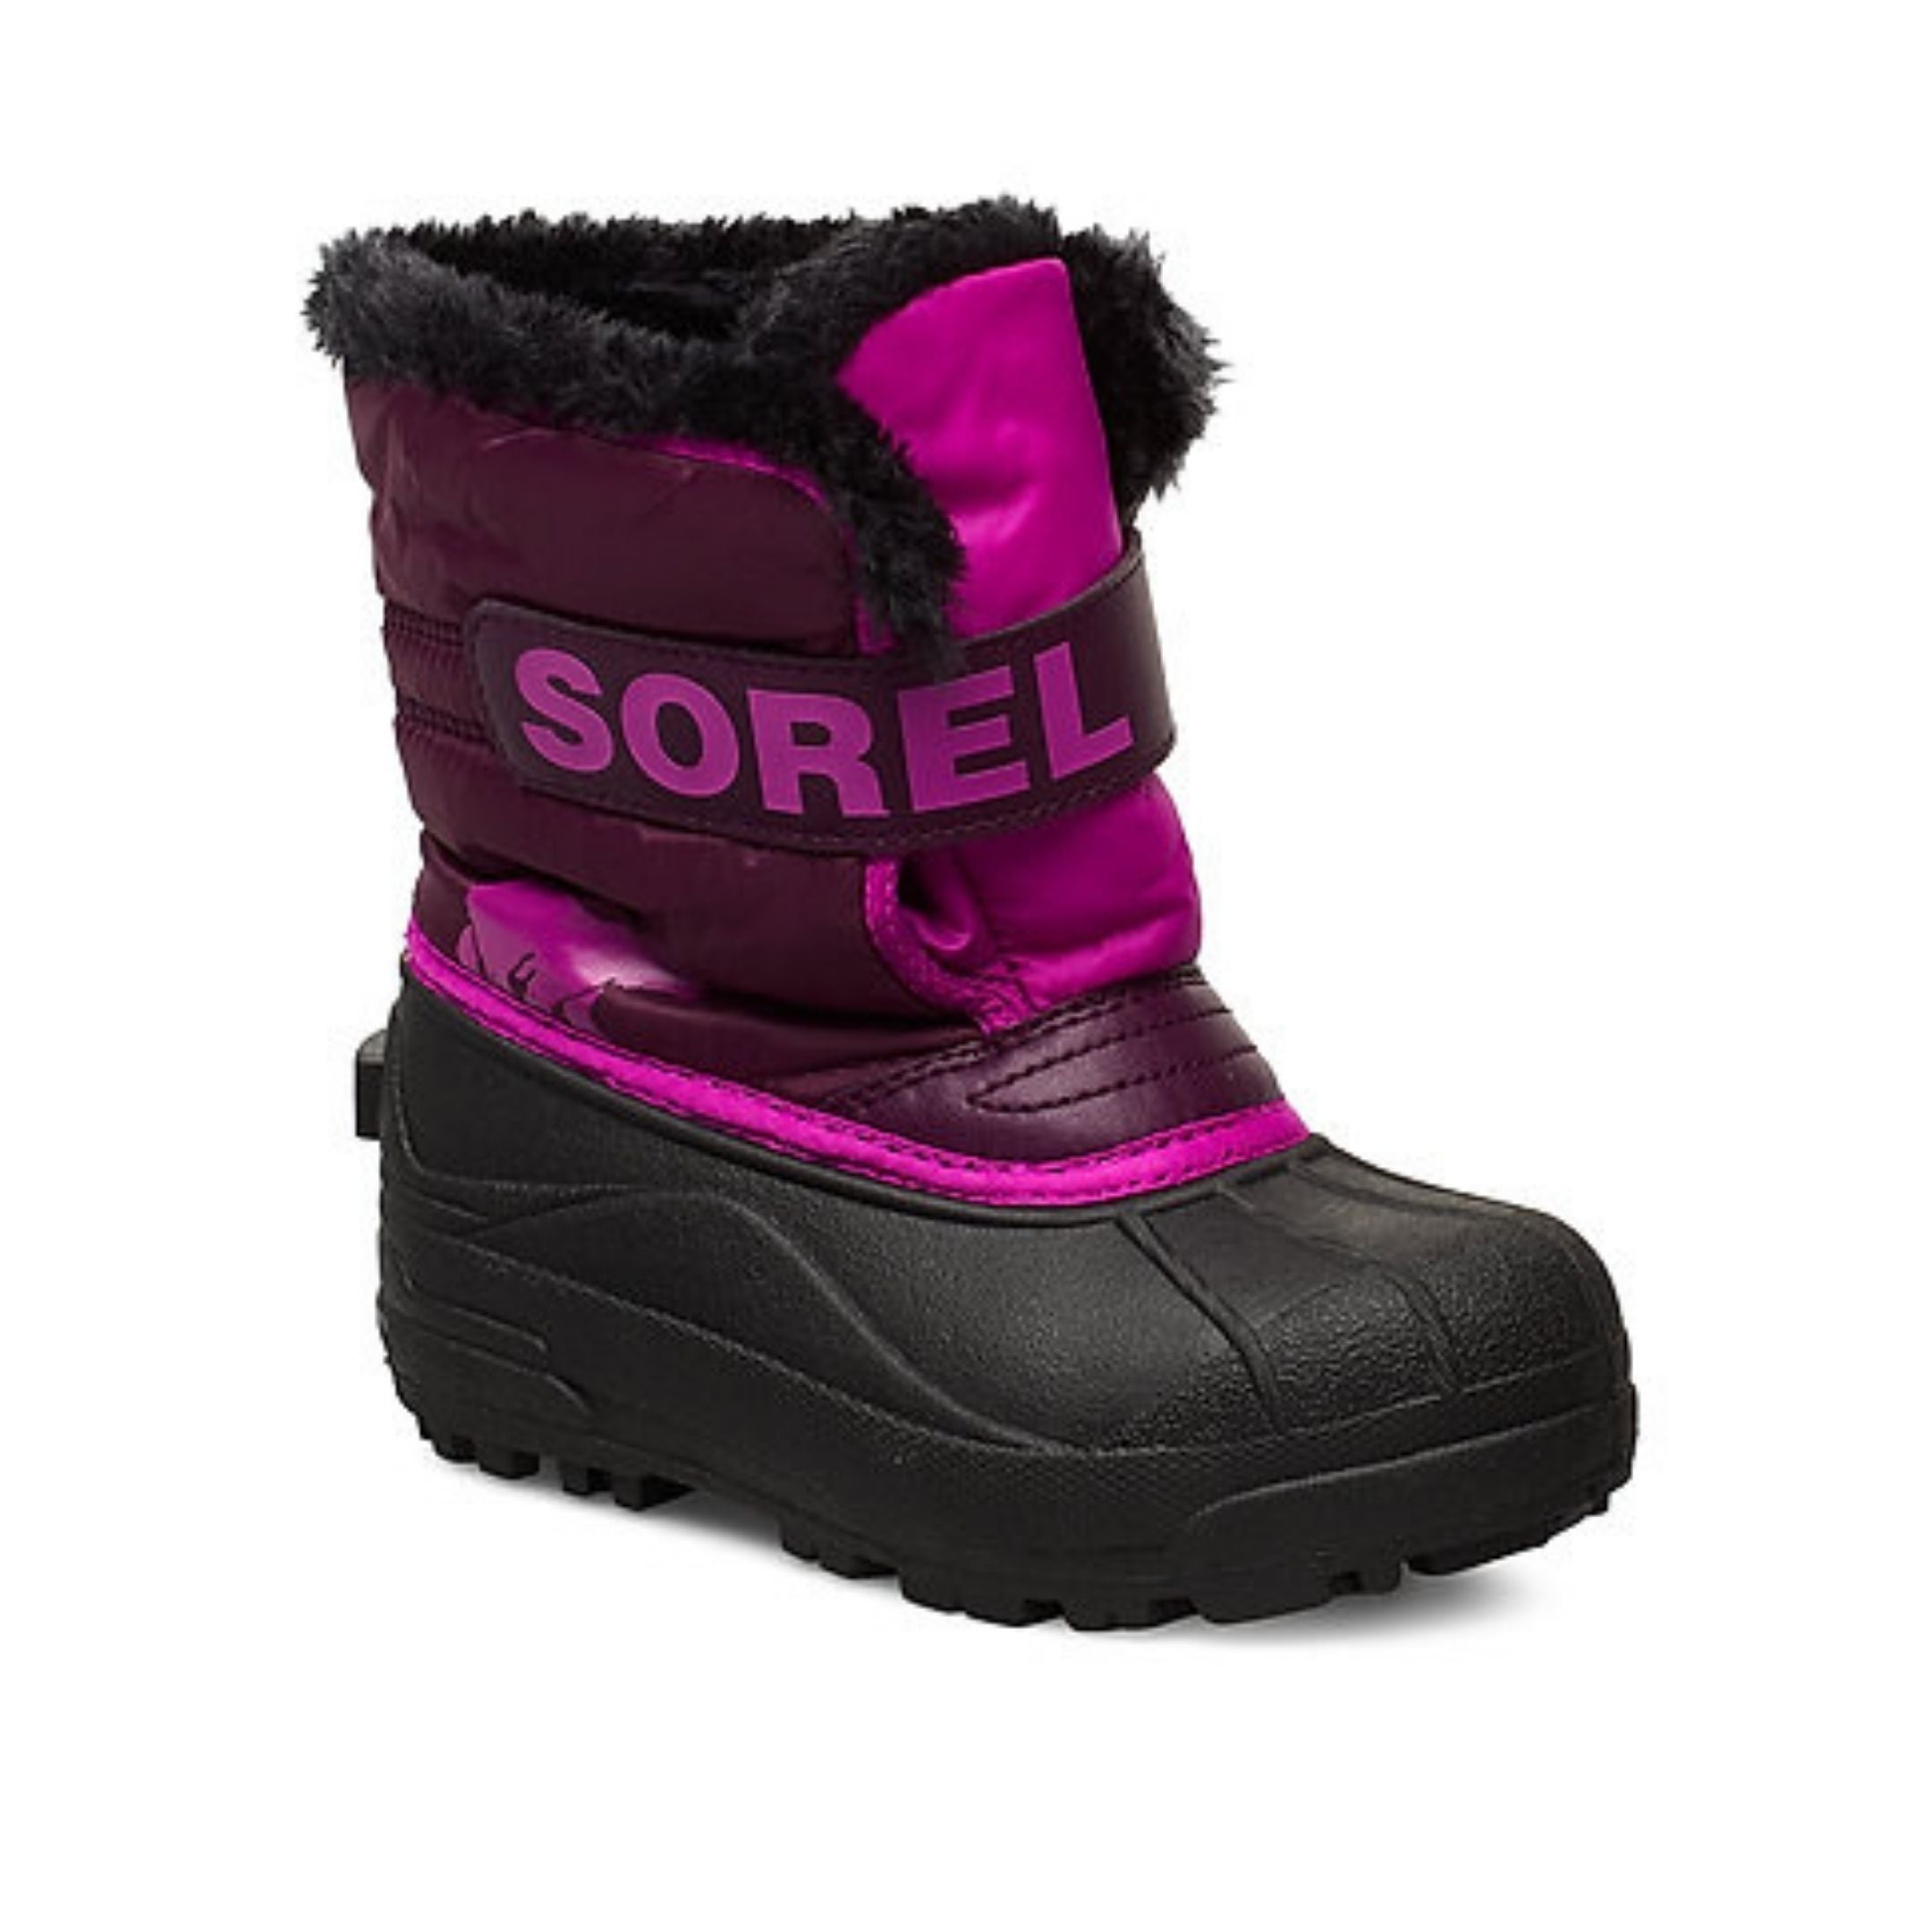 Purple winter boot with velcro strap, black rubber foot and faux fur trim